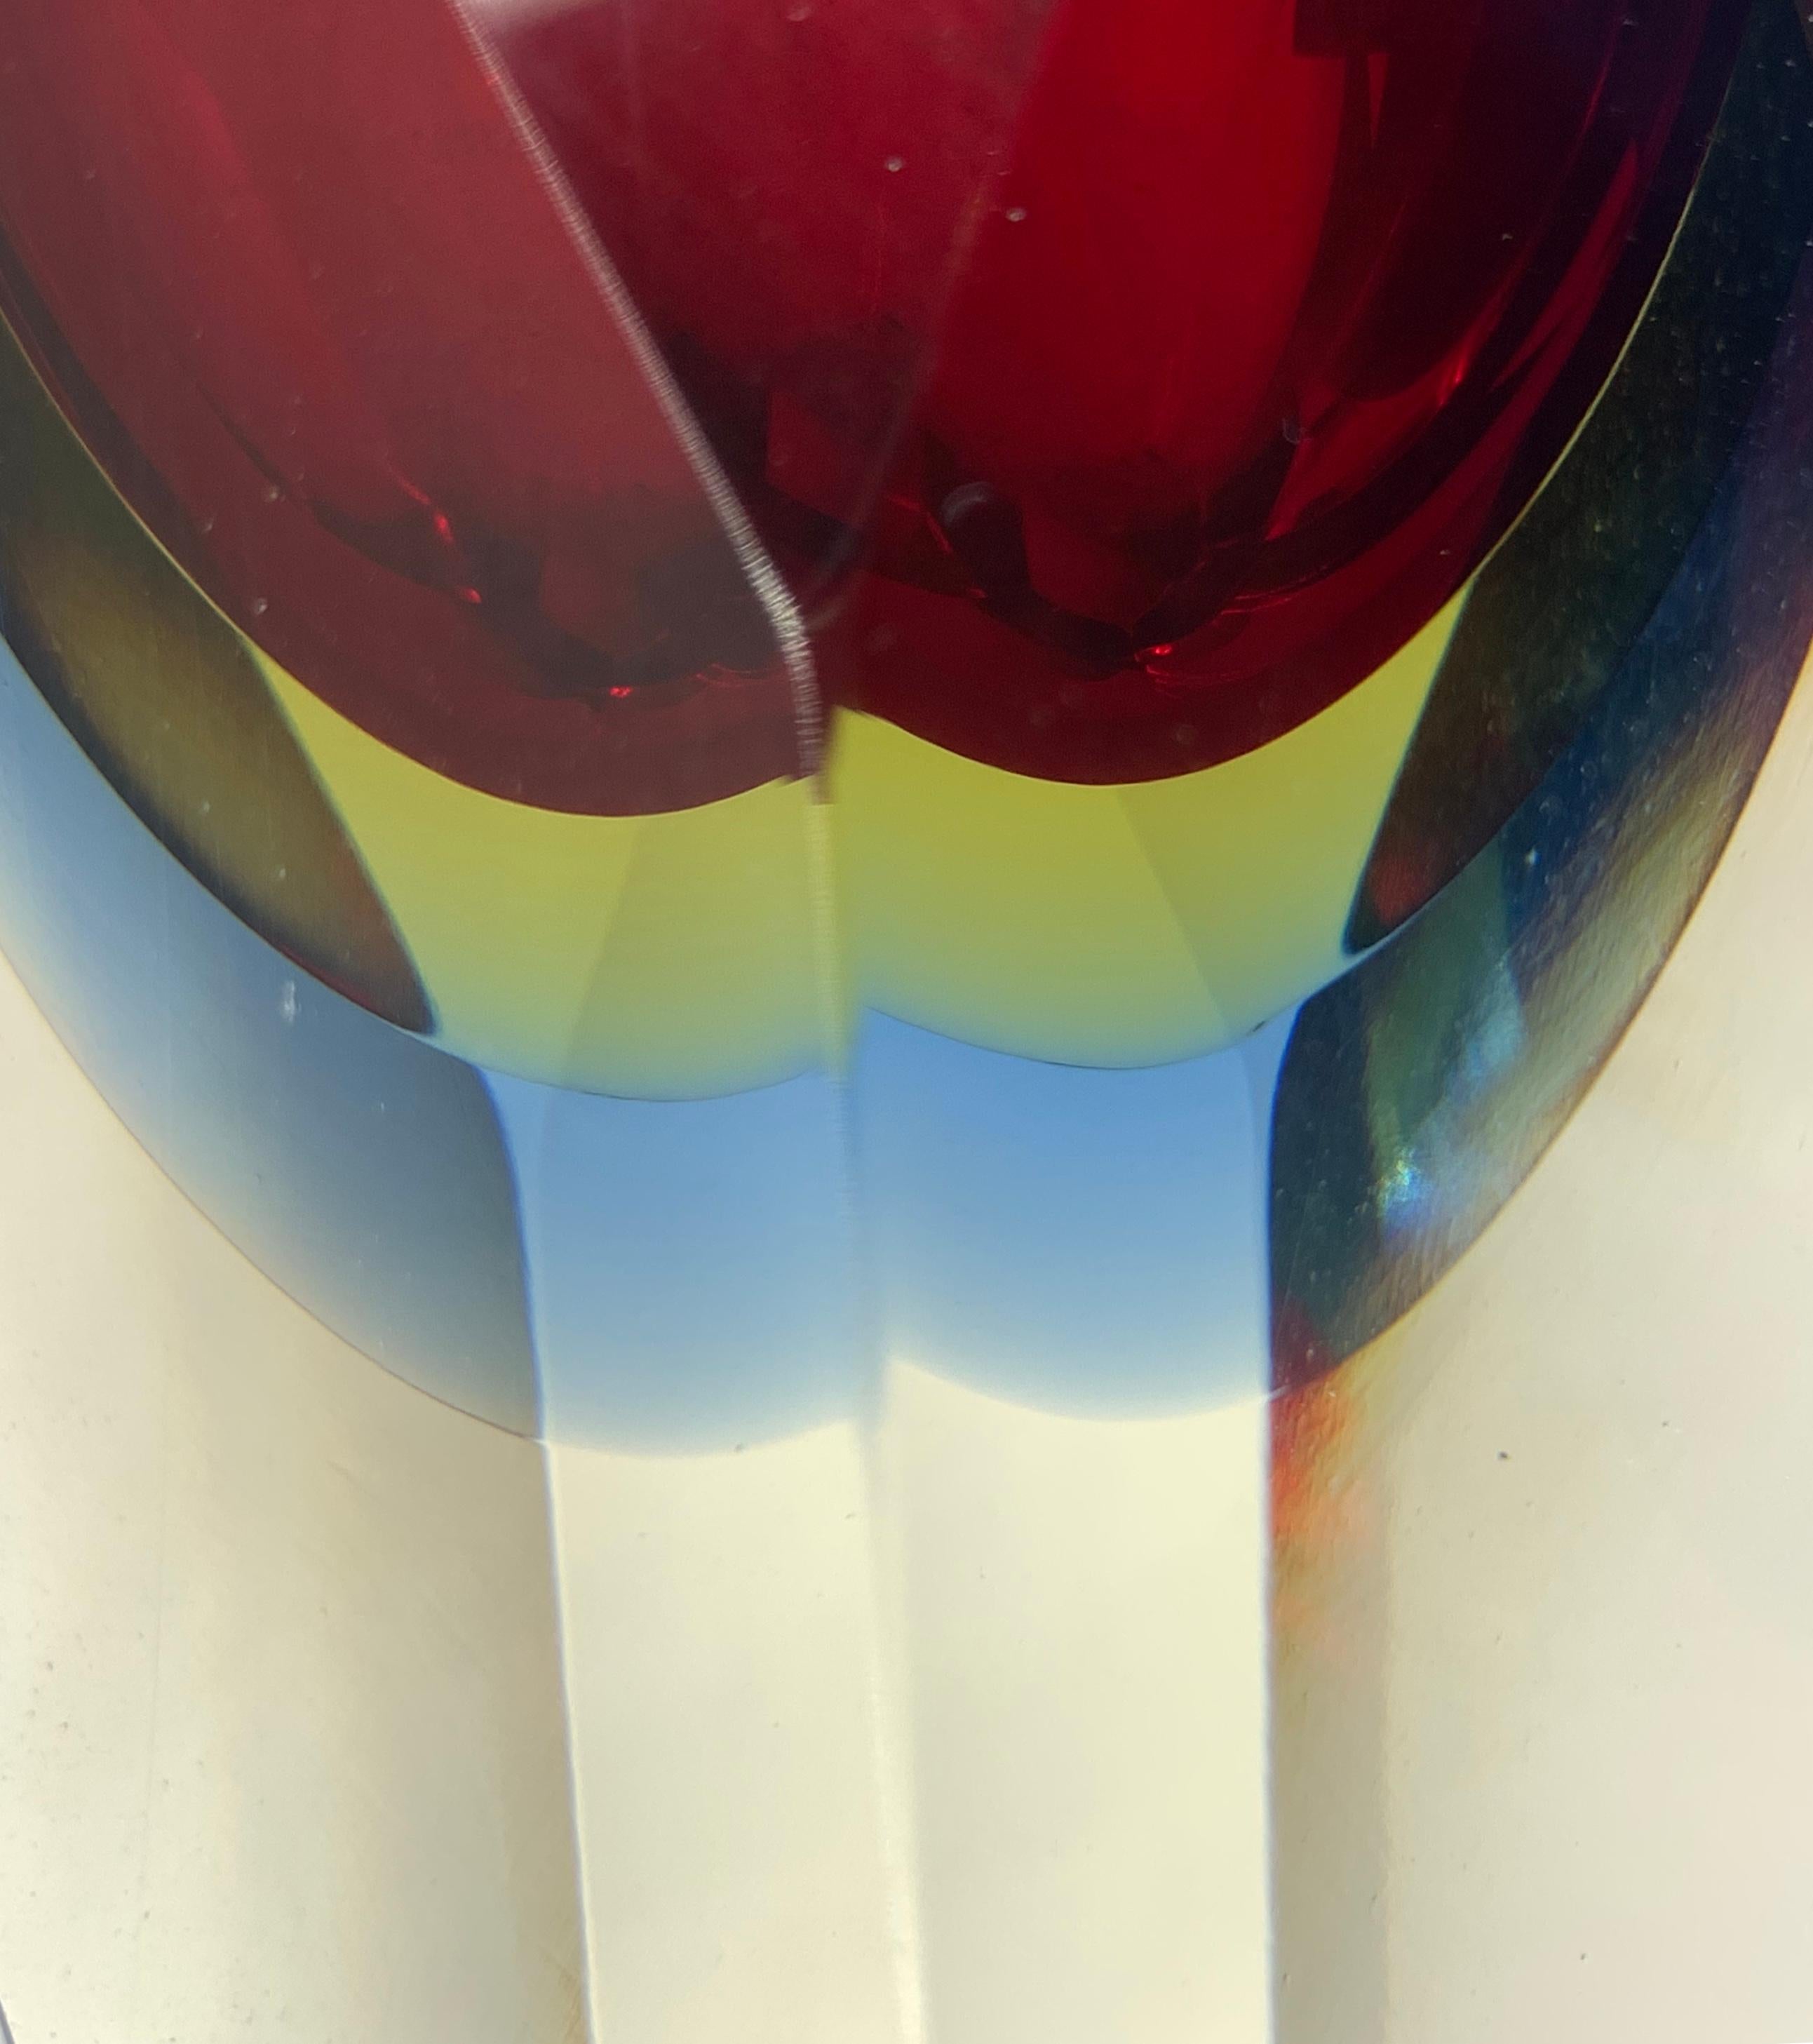 Mid-Century Modern red, blue and yellow faceted Sommerso Murano glass vase by Mandruzzato.